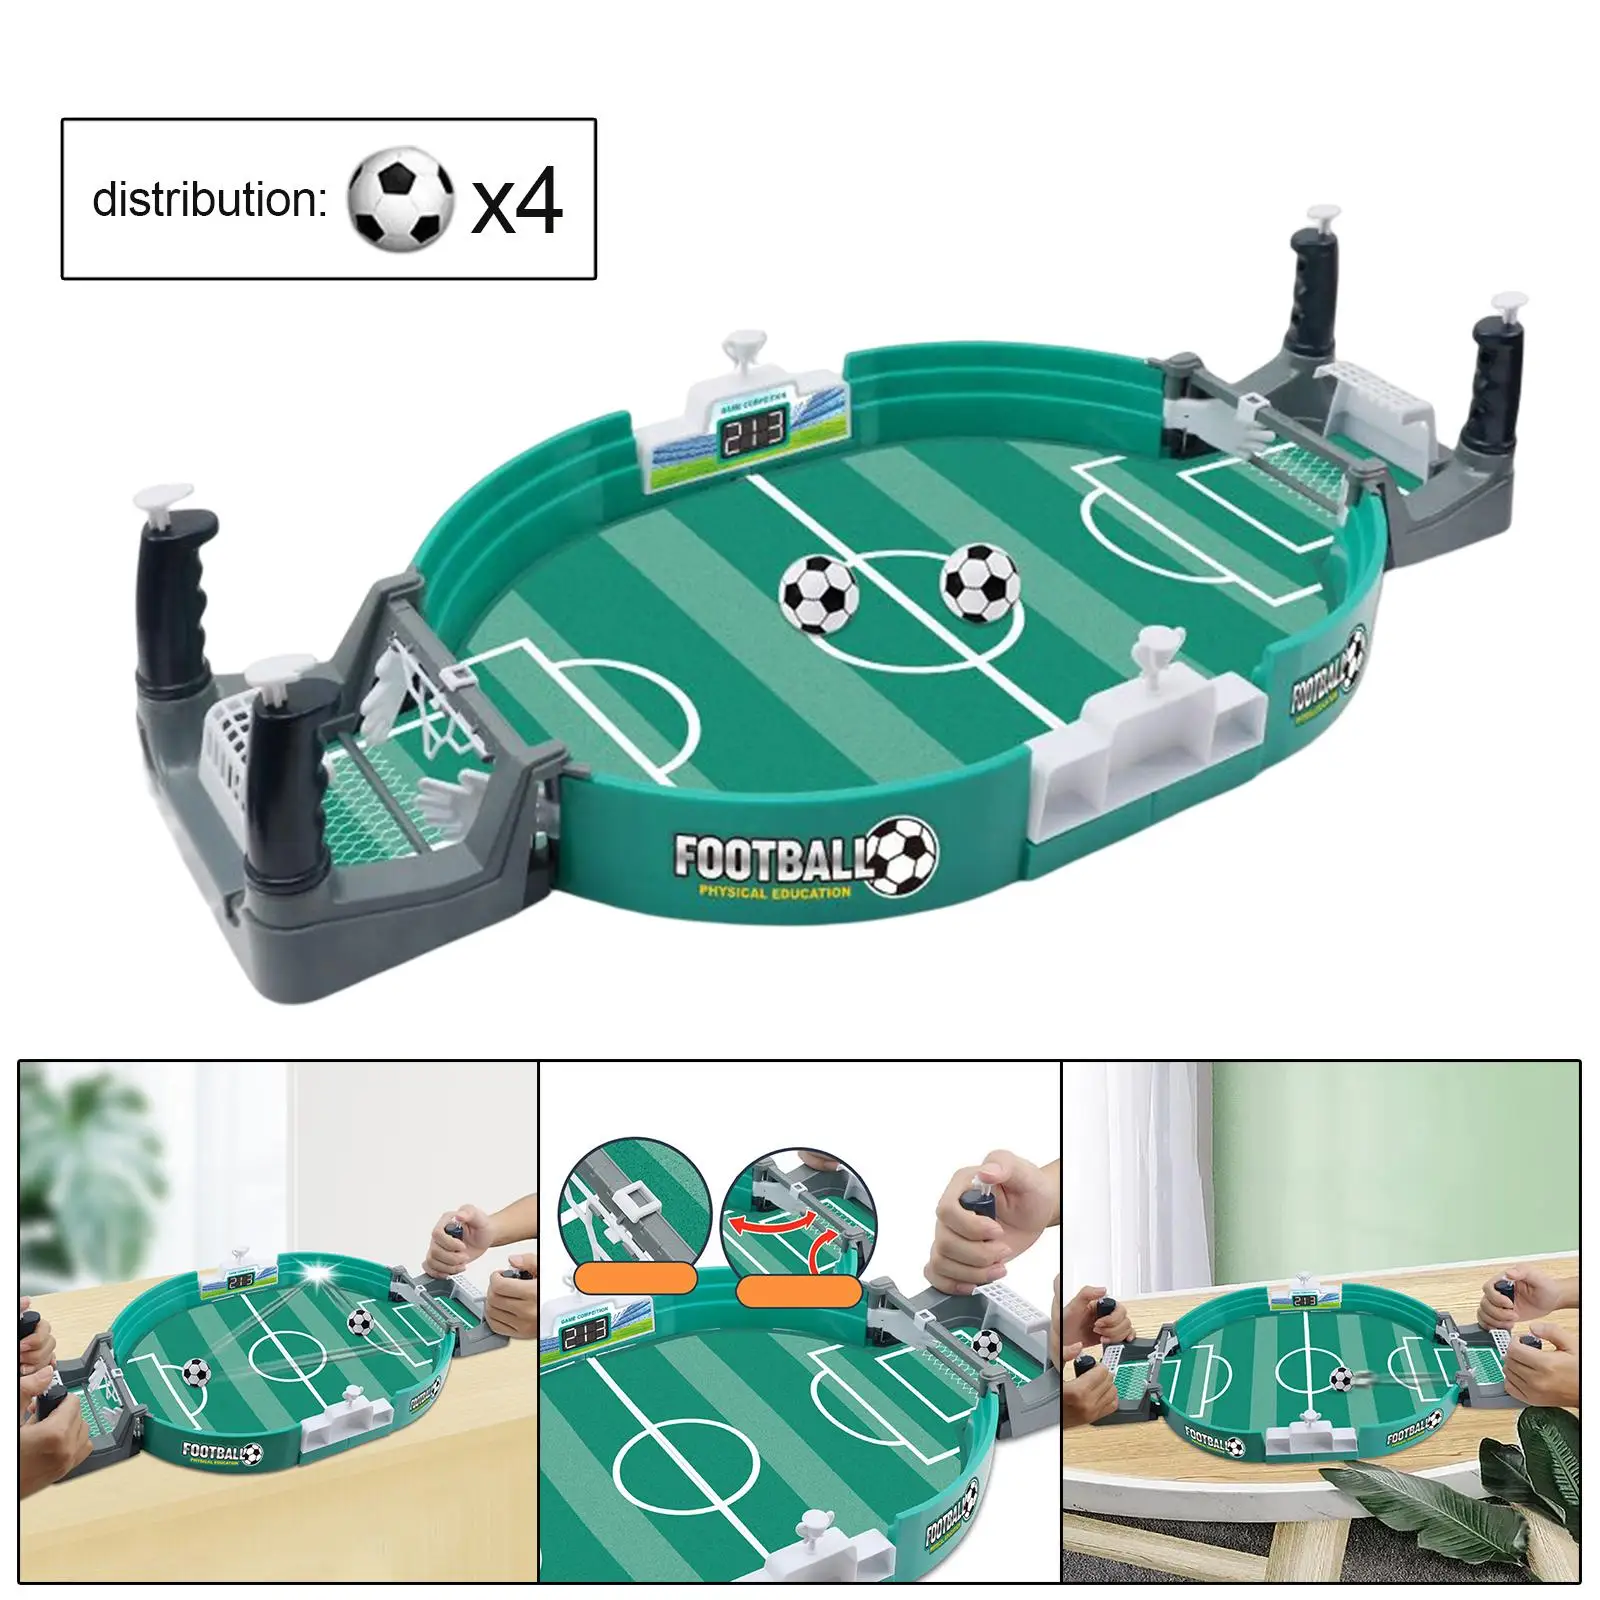 Soccertop Game Interactive Toy Sport Game Football Board Game for Family Game Kids Adults Two Players Entertainment Party